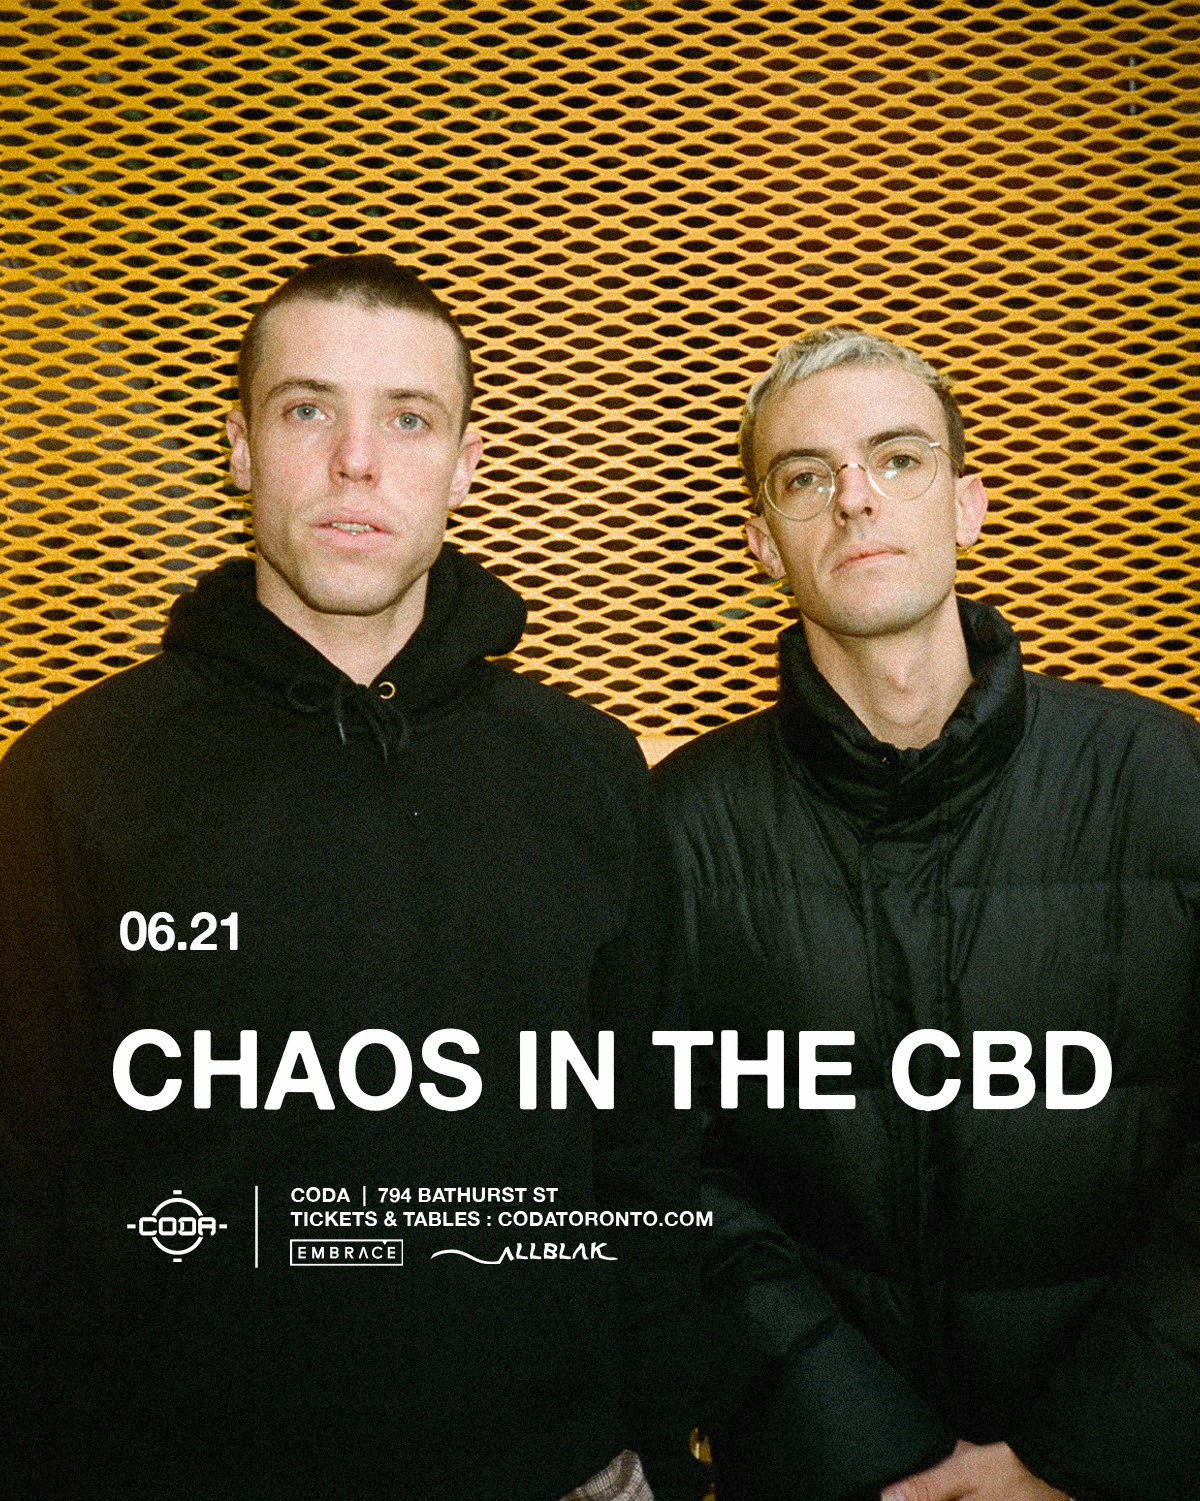 Chaos In The CBD - フライヤー裏